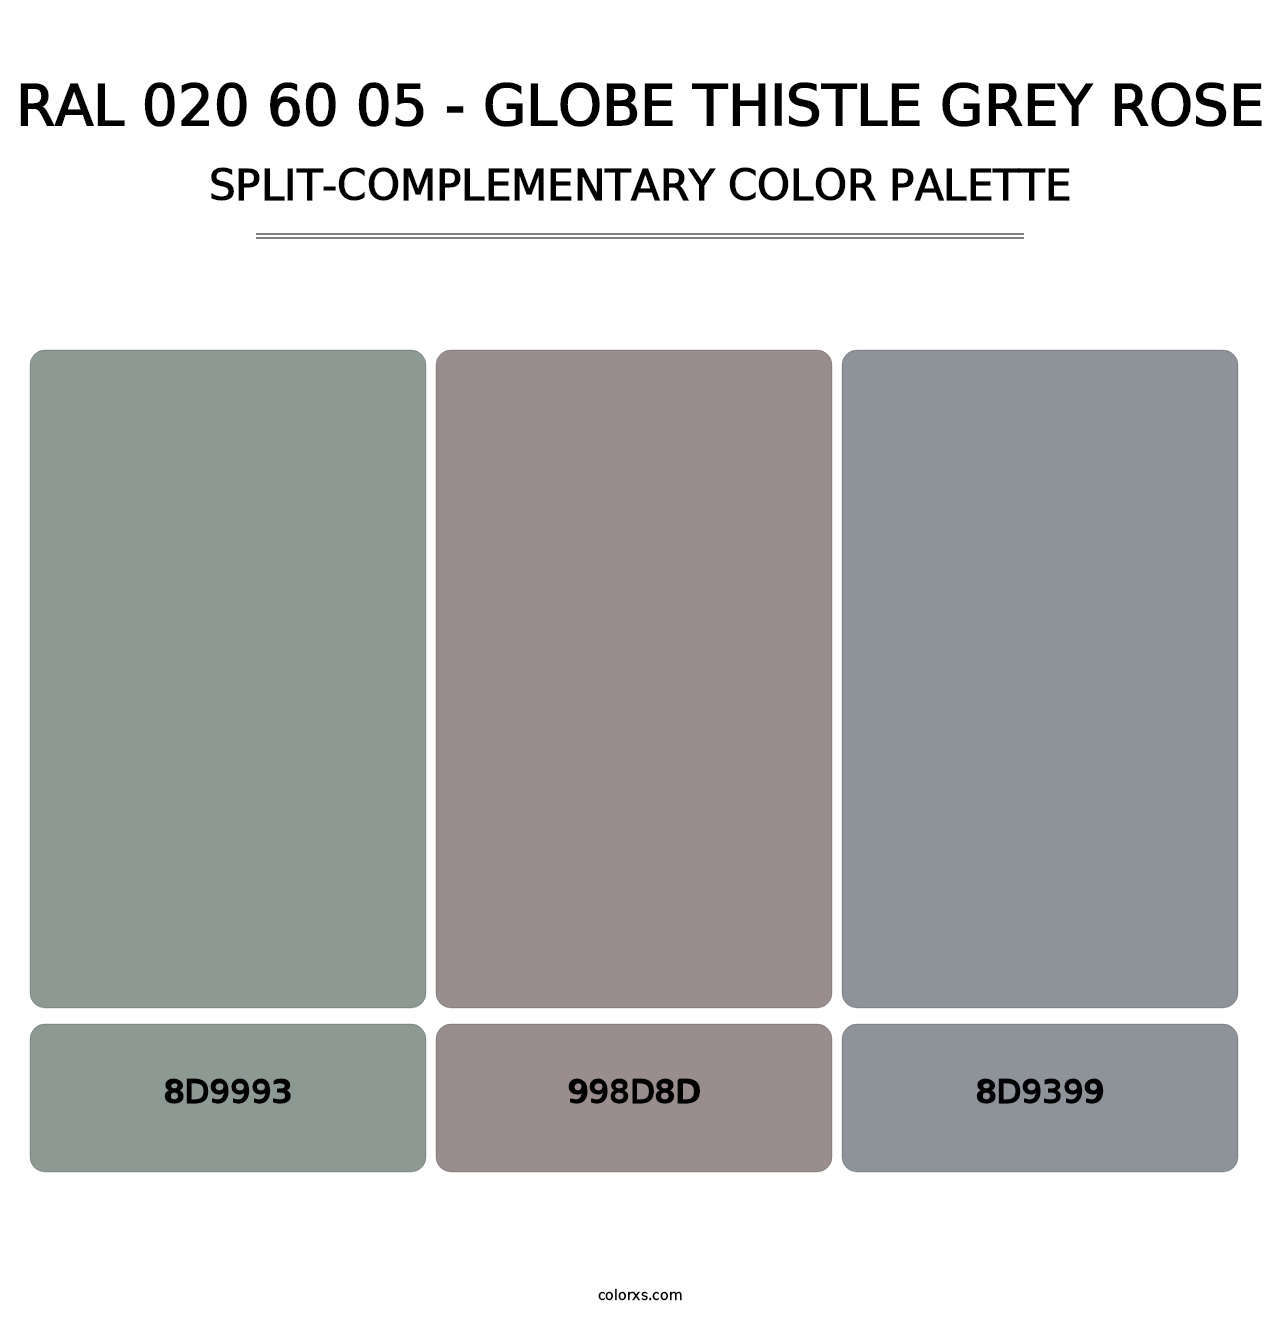 RAL 020 60 05 - Globe Thistle Grey Rose - Split-Complementary Color Palette